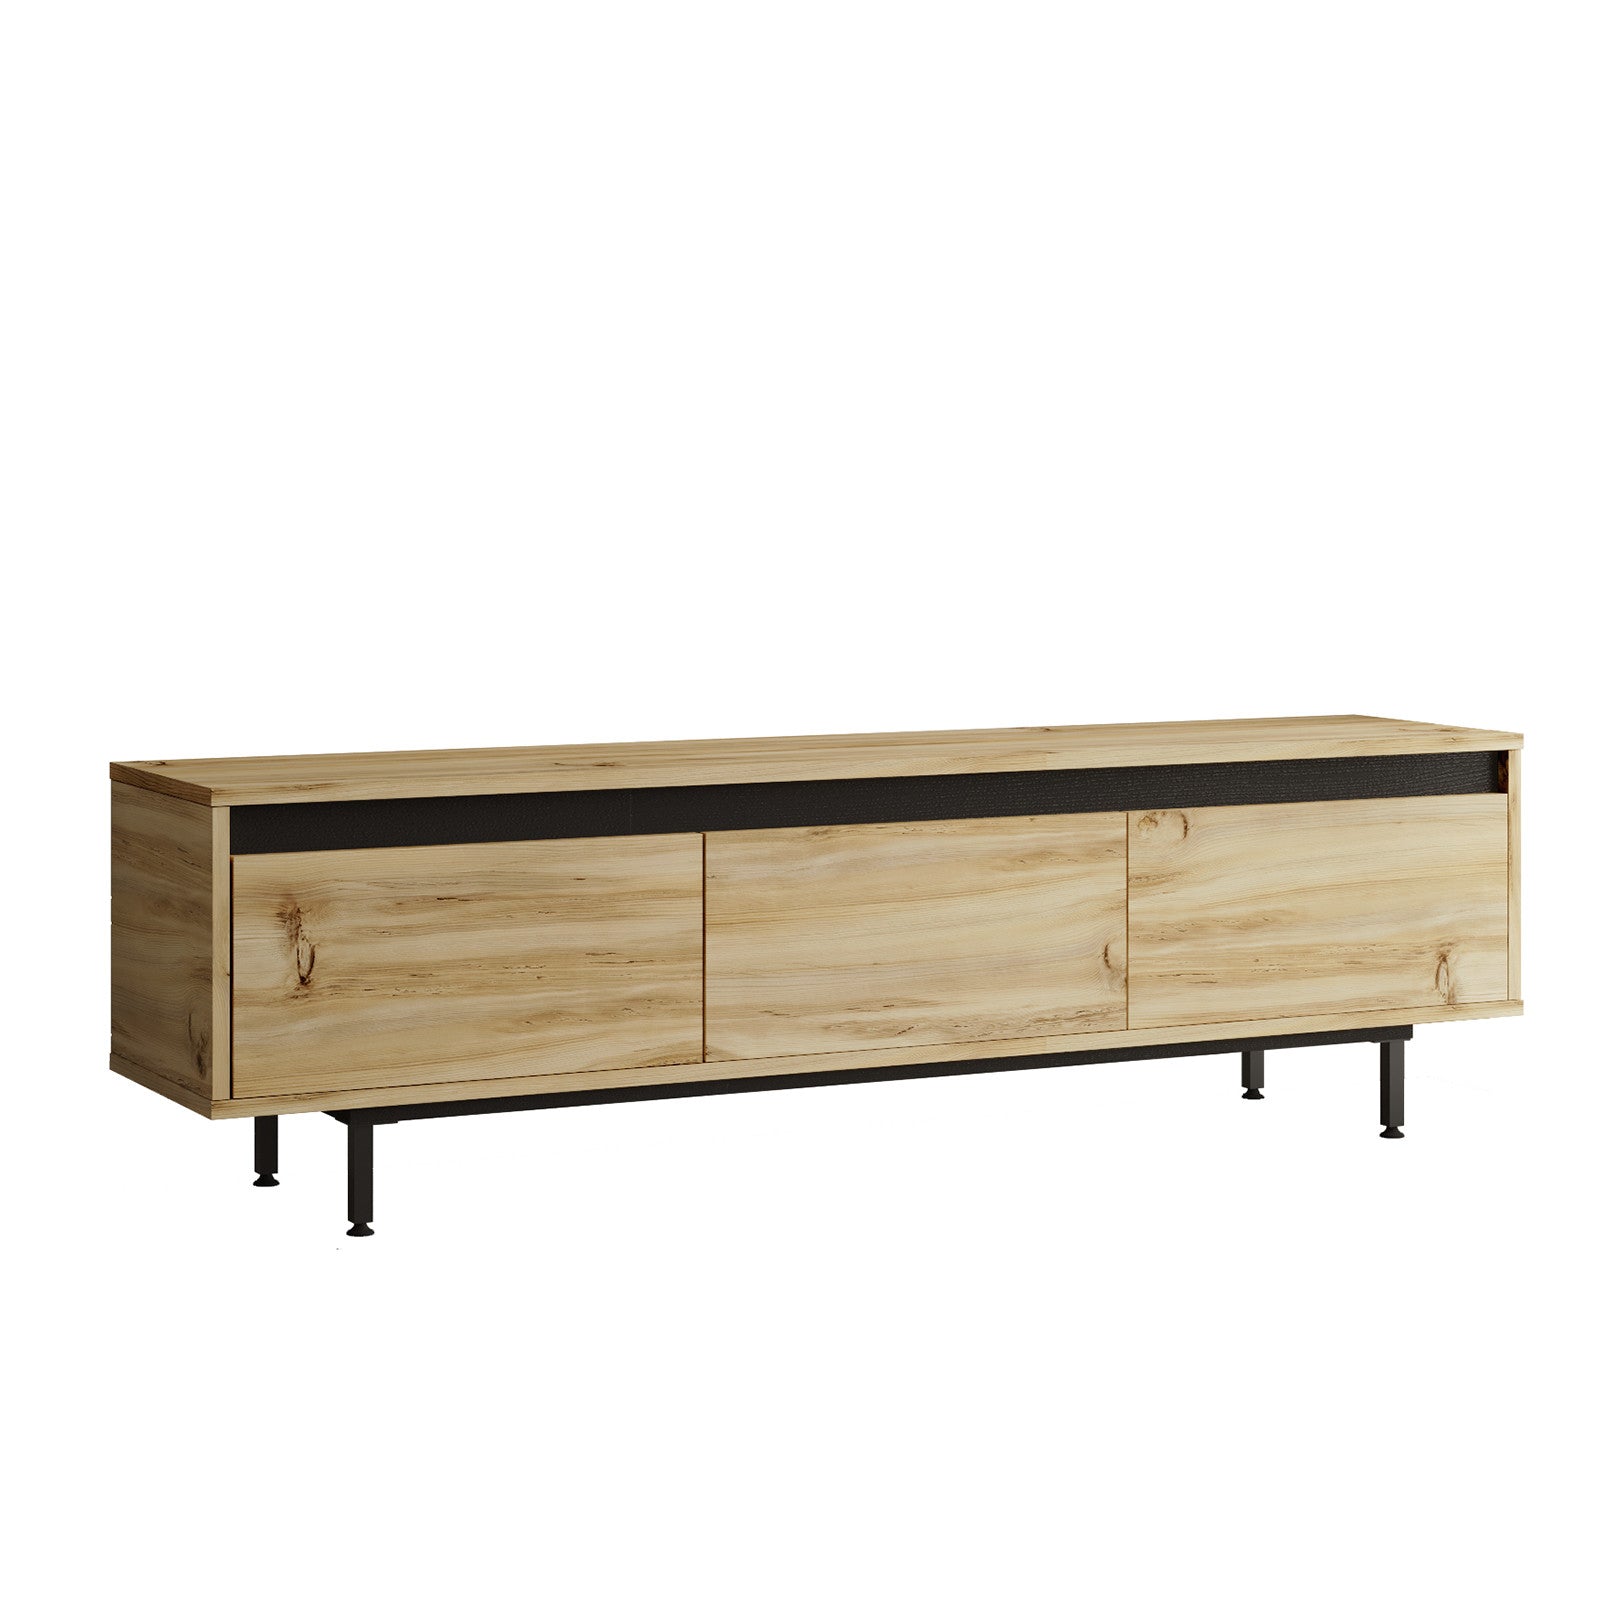 TV Stand LV1 - KL